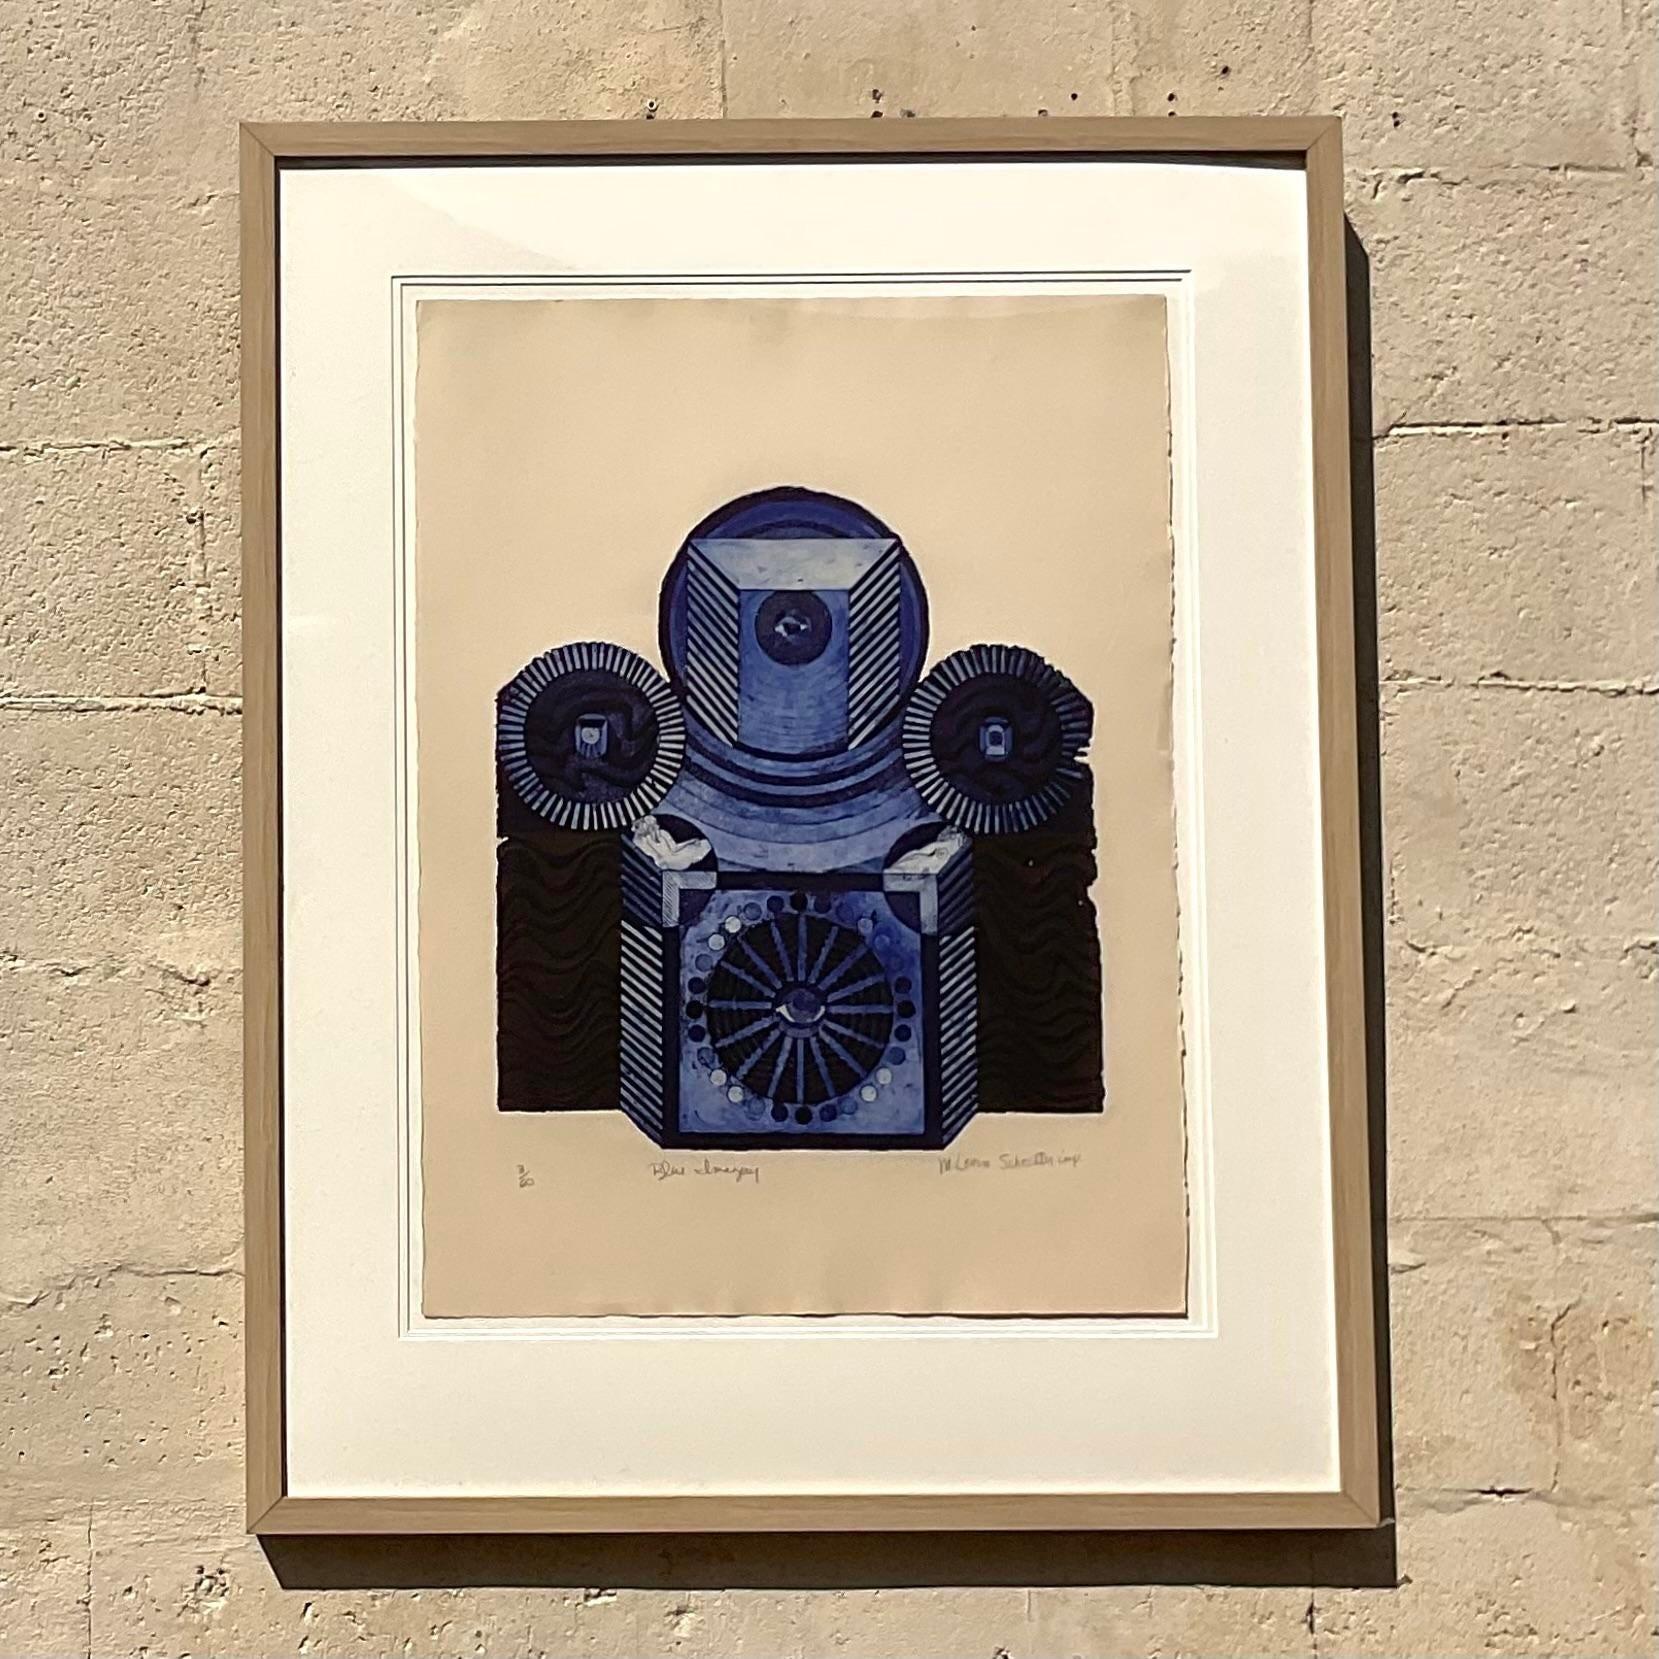 A spectacular vintage Contemporary Serigraph. A chic Abstract composition in brilliant shades of blue. Signed and numbered by the artist. Acquired from a Palm Beach estate.